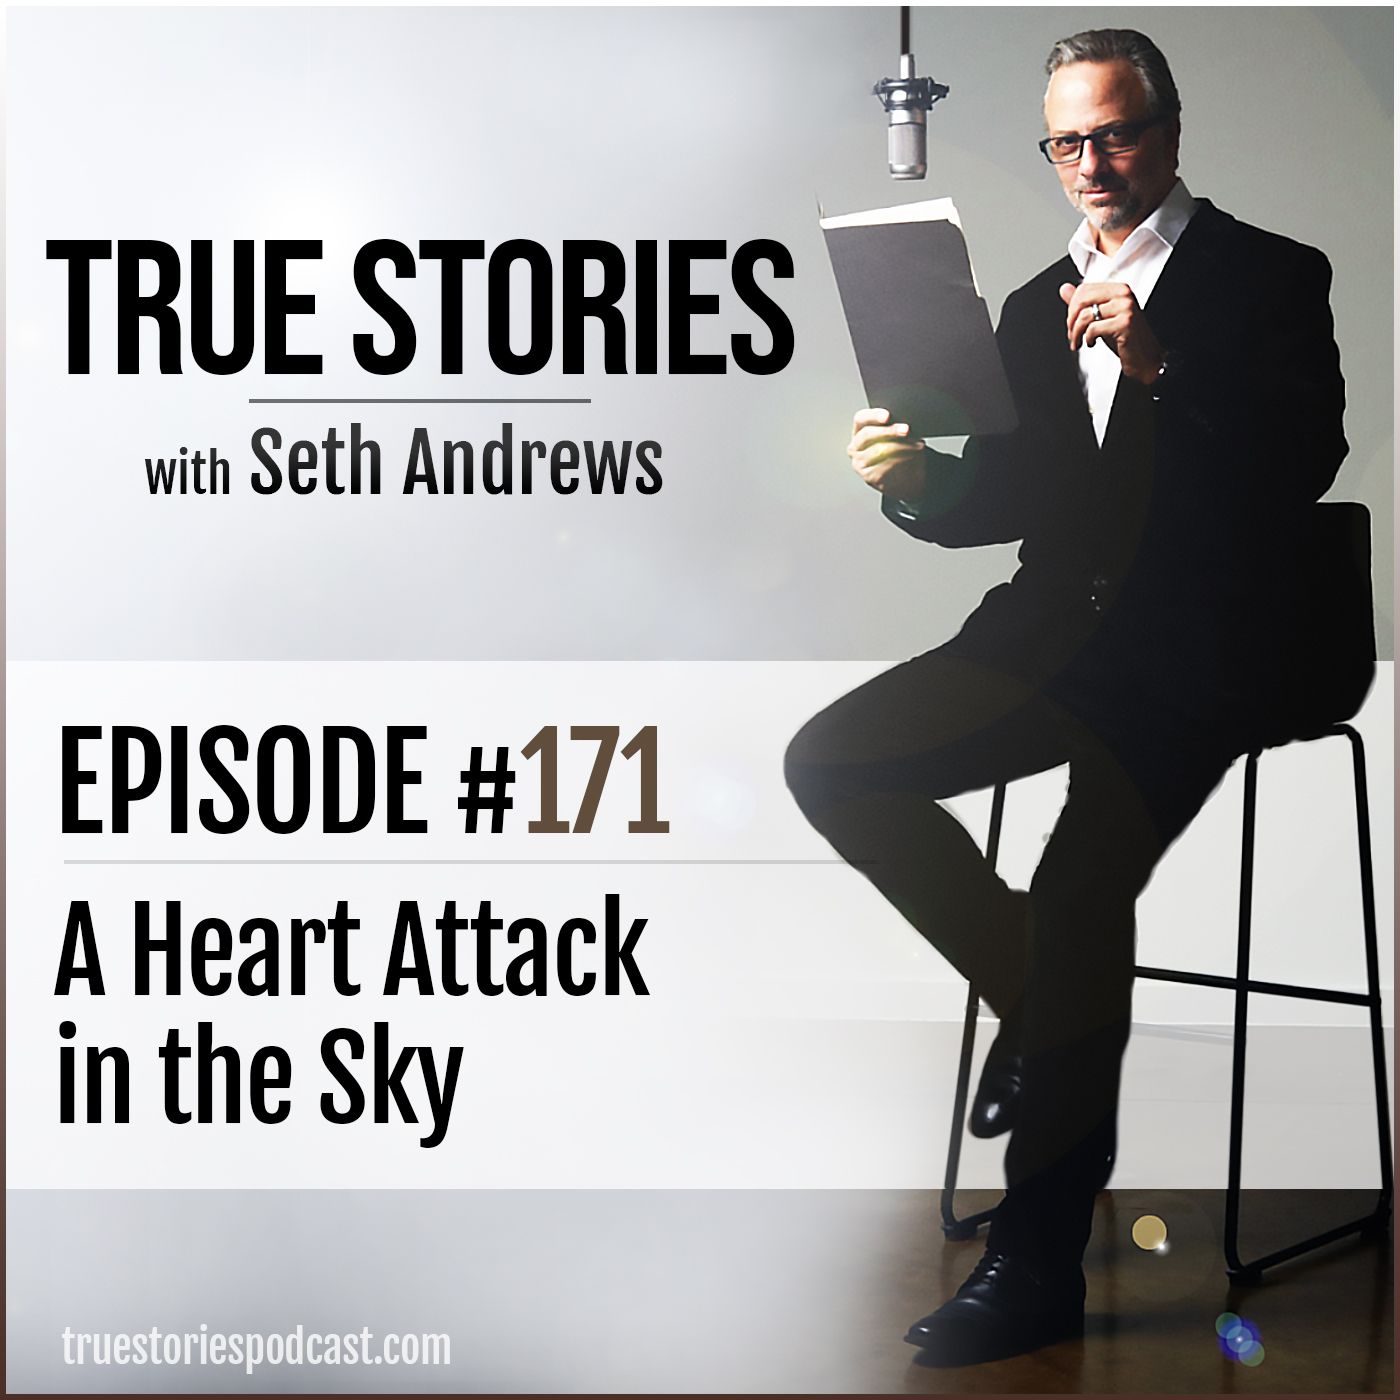 True Stories #171 - A Heart Attack in the Sky